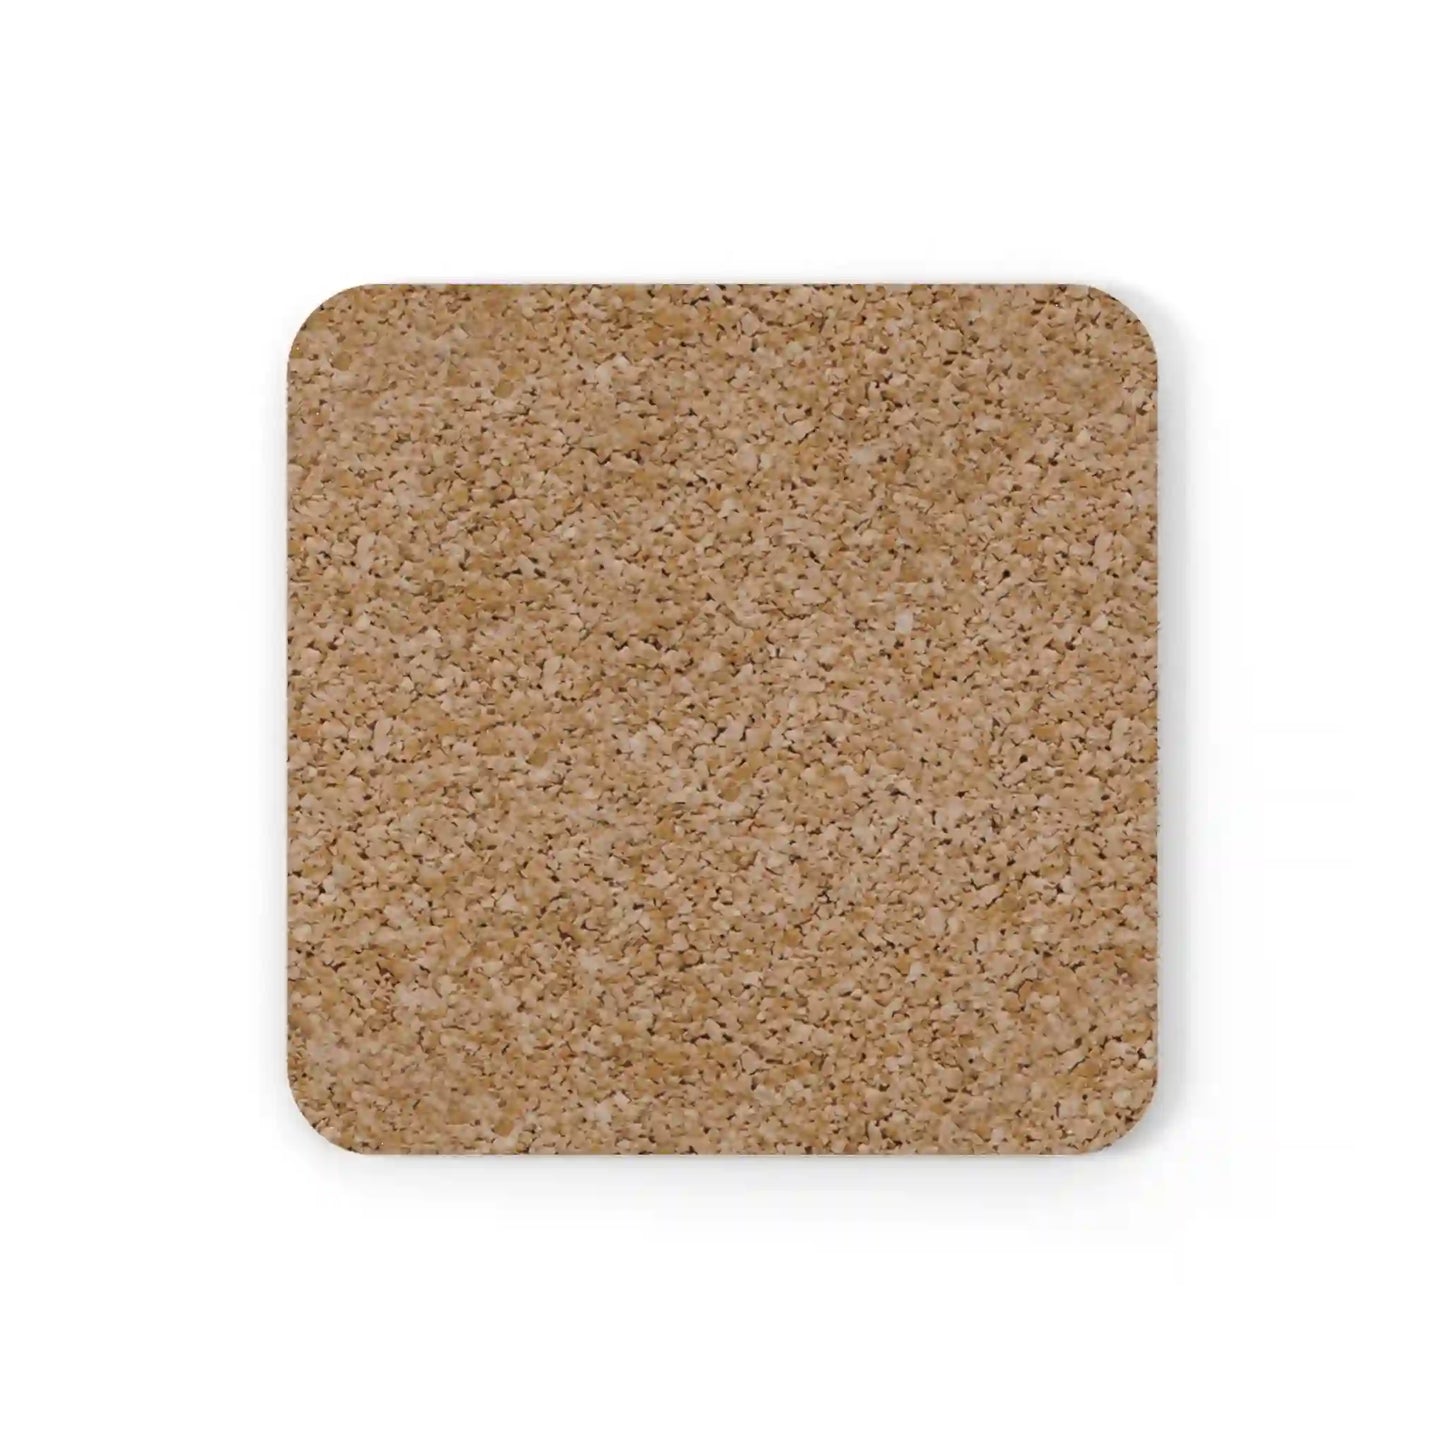 Cork Back Coaster (Personalize with your name)